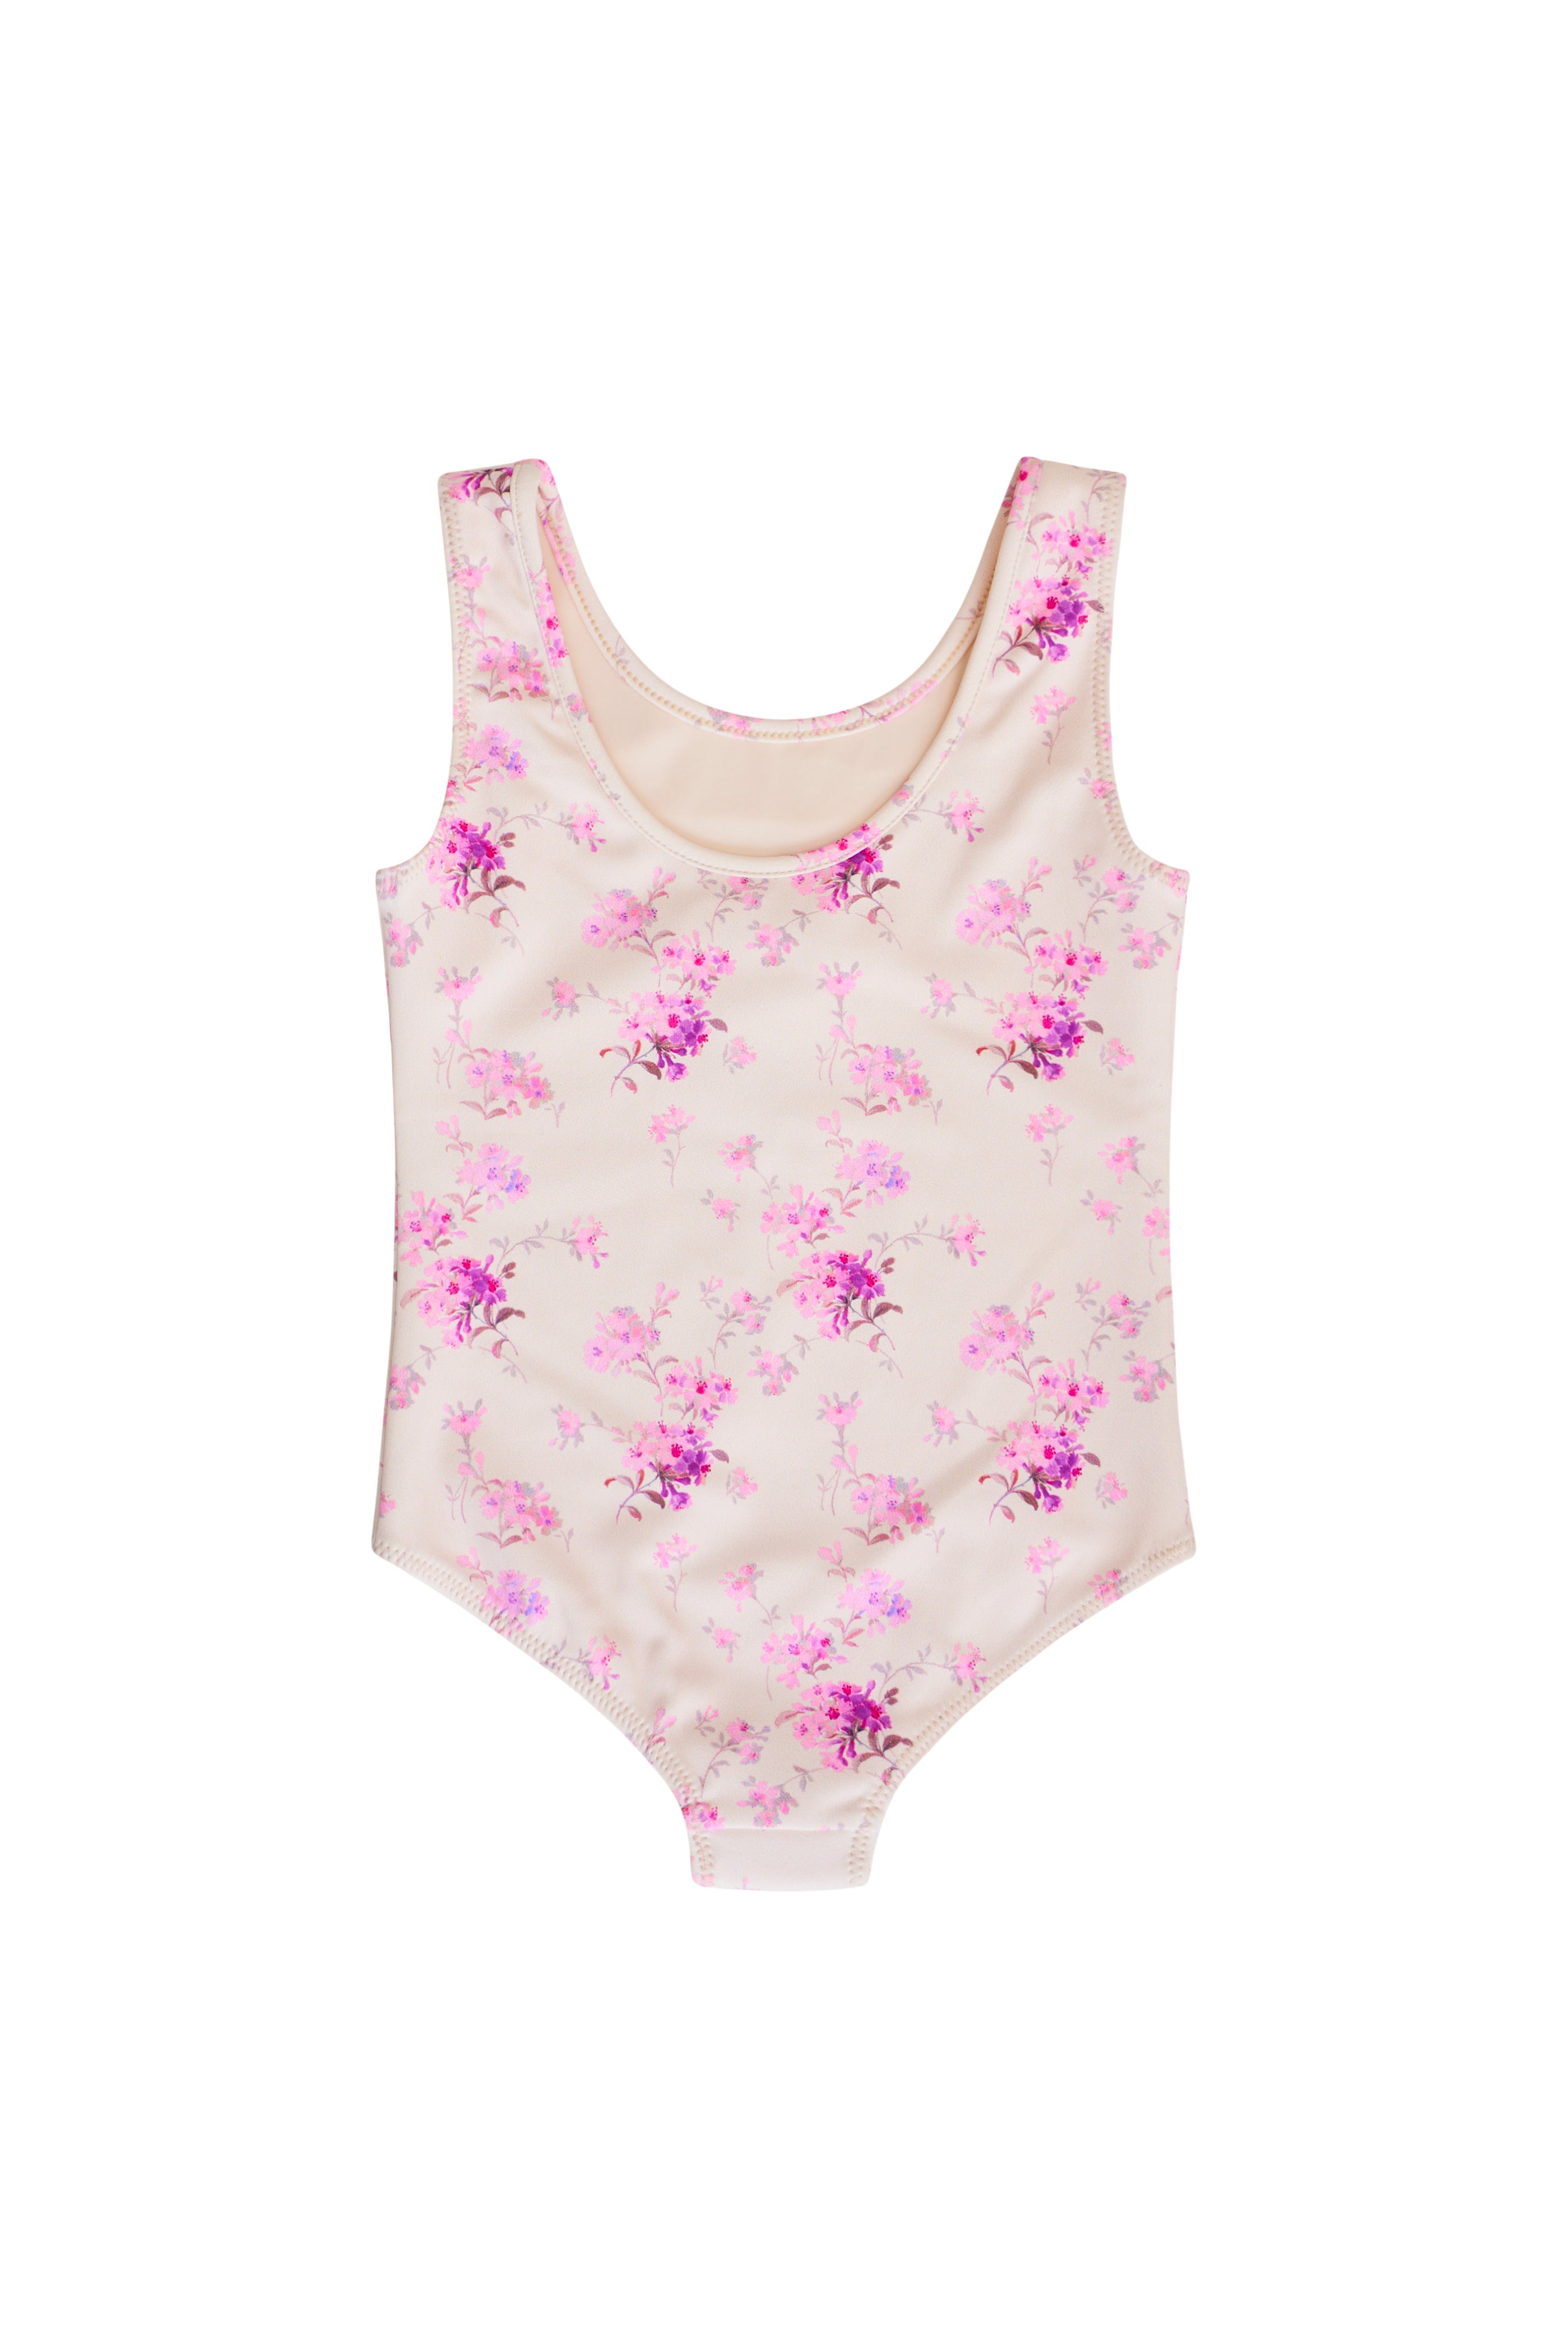 One piece features a vibrant dainty floral print all over.